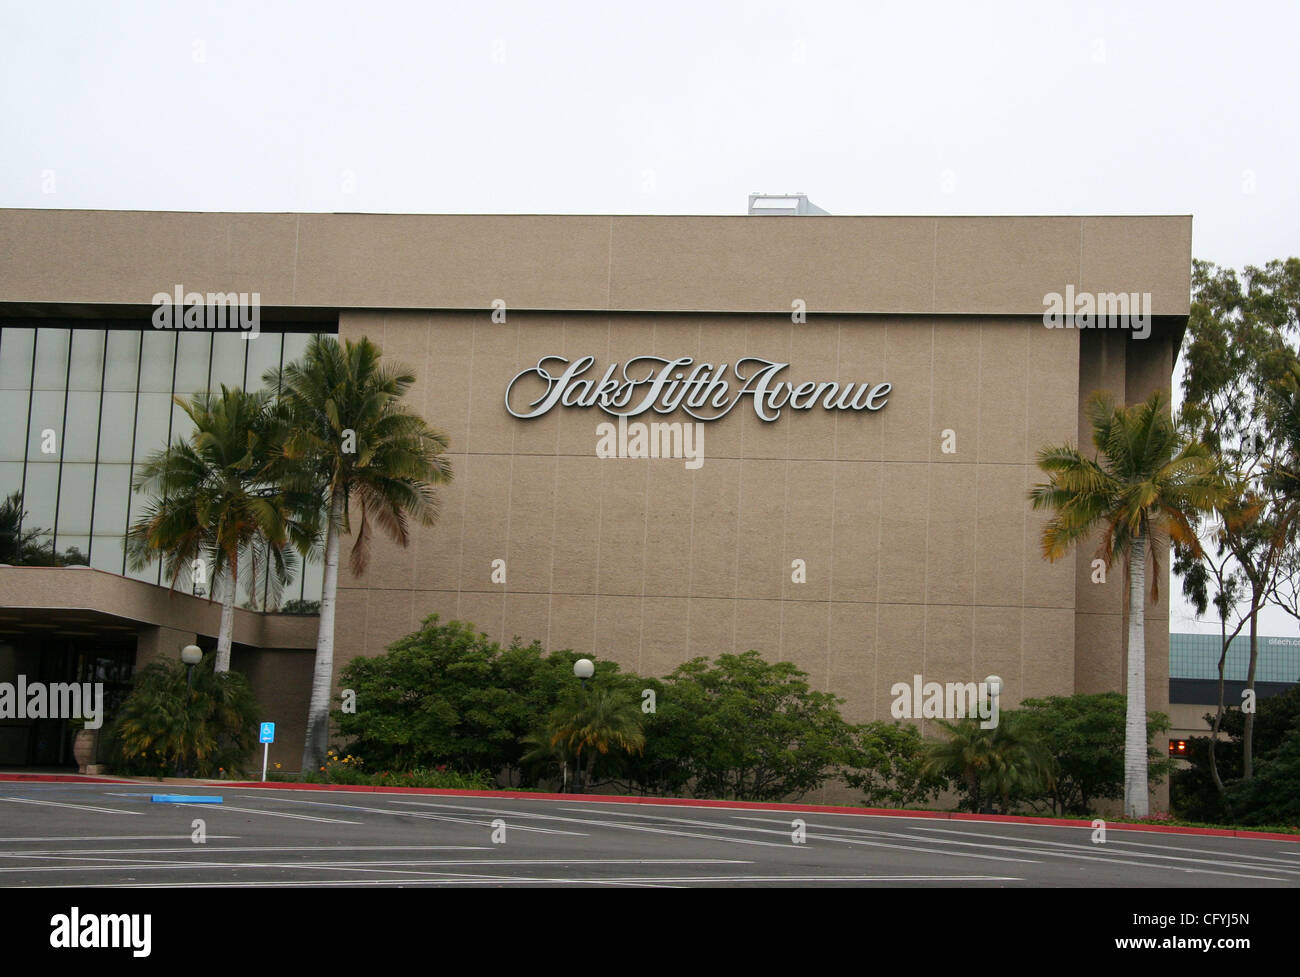 May 20, 2007 - Costa Mesa, CA, USA - Saks Fifth Avenue is a chain